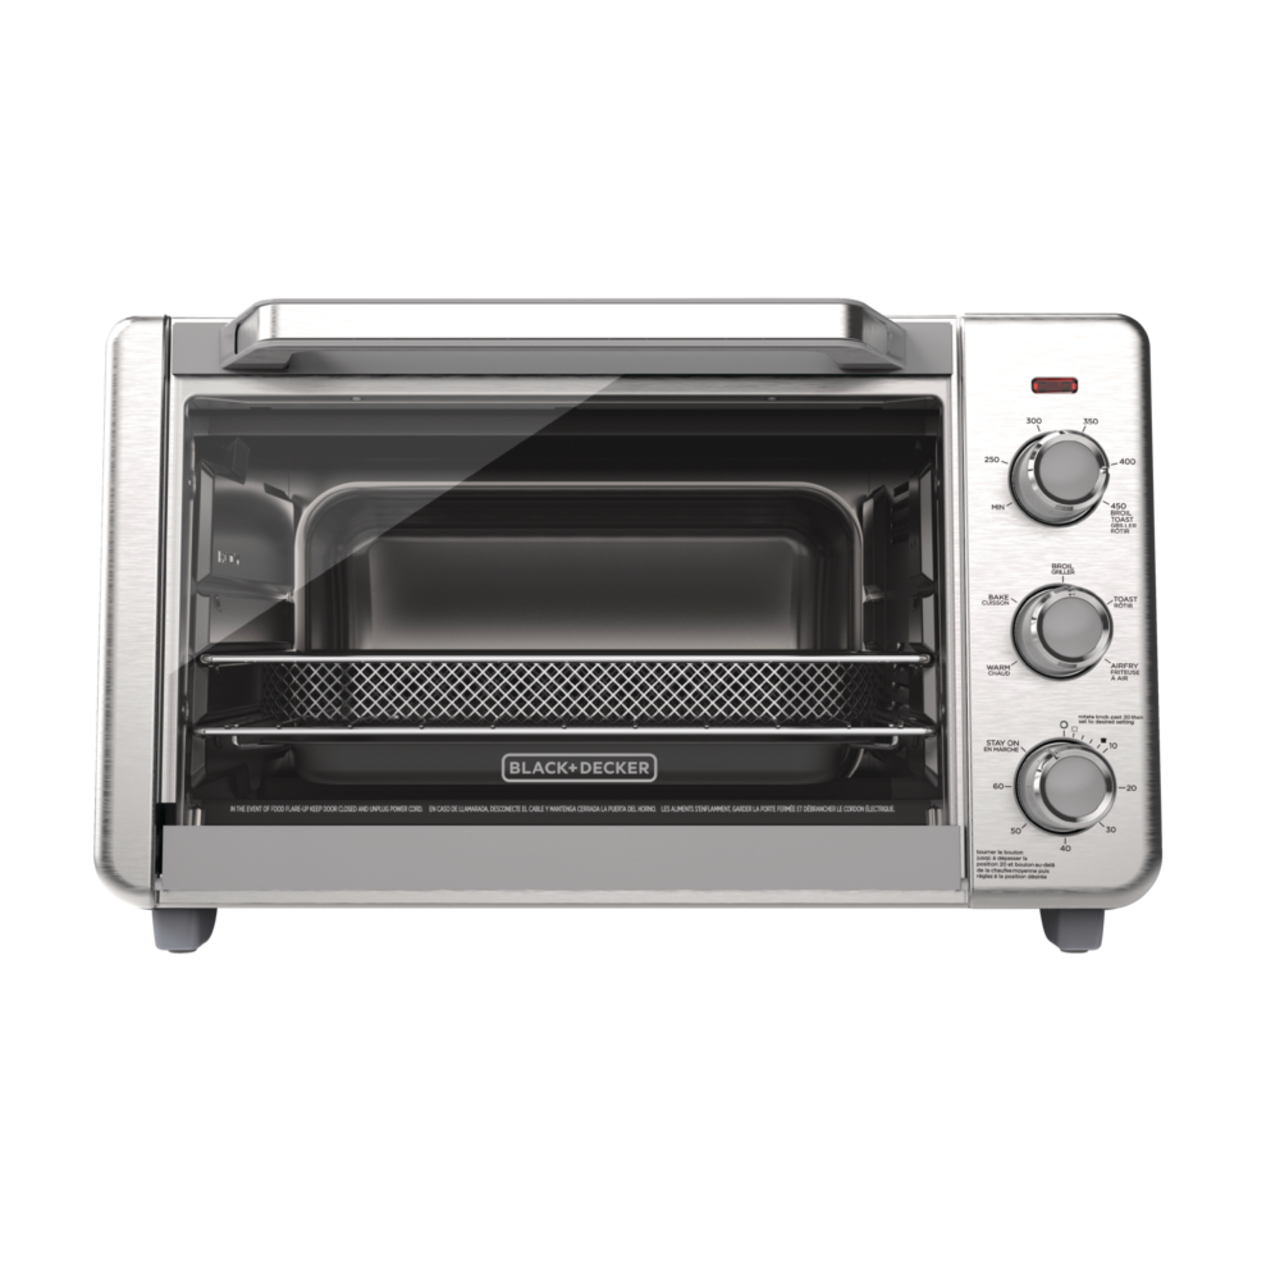 https://media-www.canadiantire.ca/product/living/kitchen/kitchen-appliances/0430146/black-decker-crisp-n-bake-6-slice-air-fry-toaster-oven-26ef7d9c-064d-445a-b621-9f32ee1e569a.png?imdensity=1&imwidth=640&impolicy=mZoom